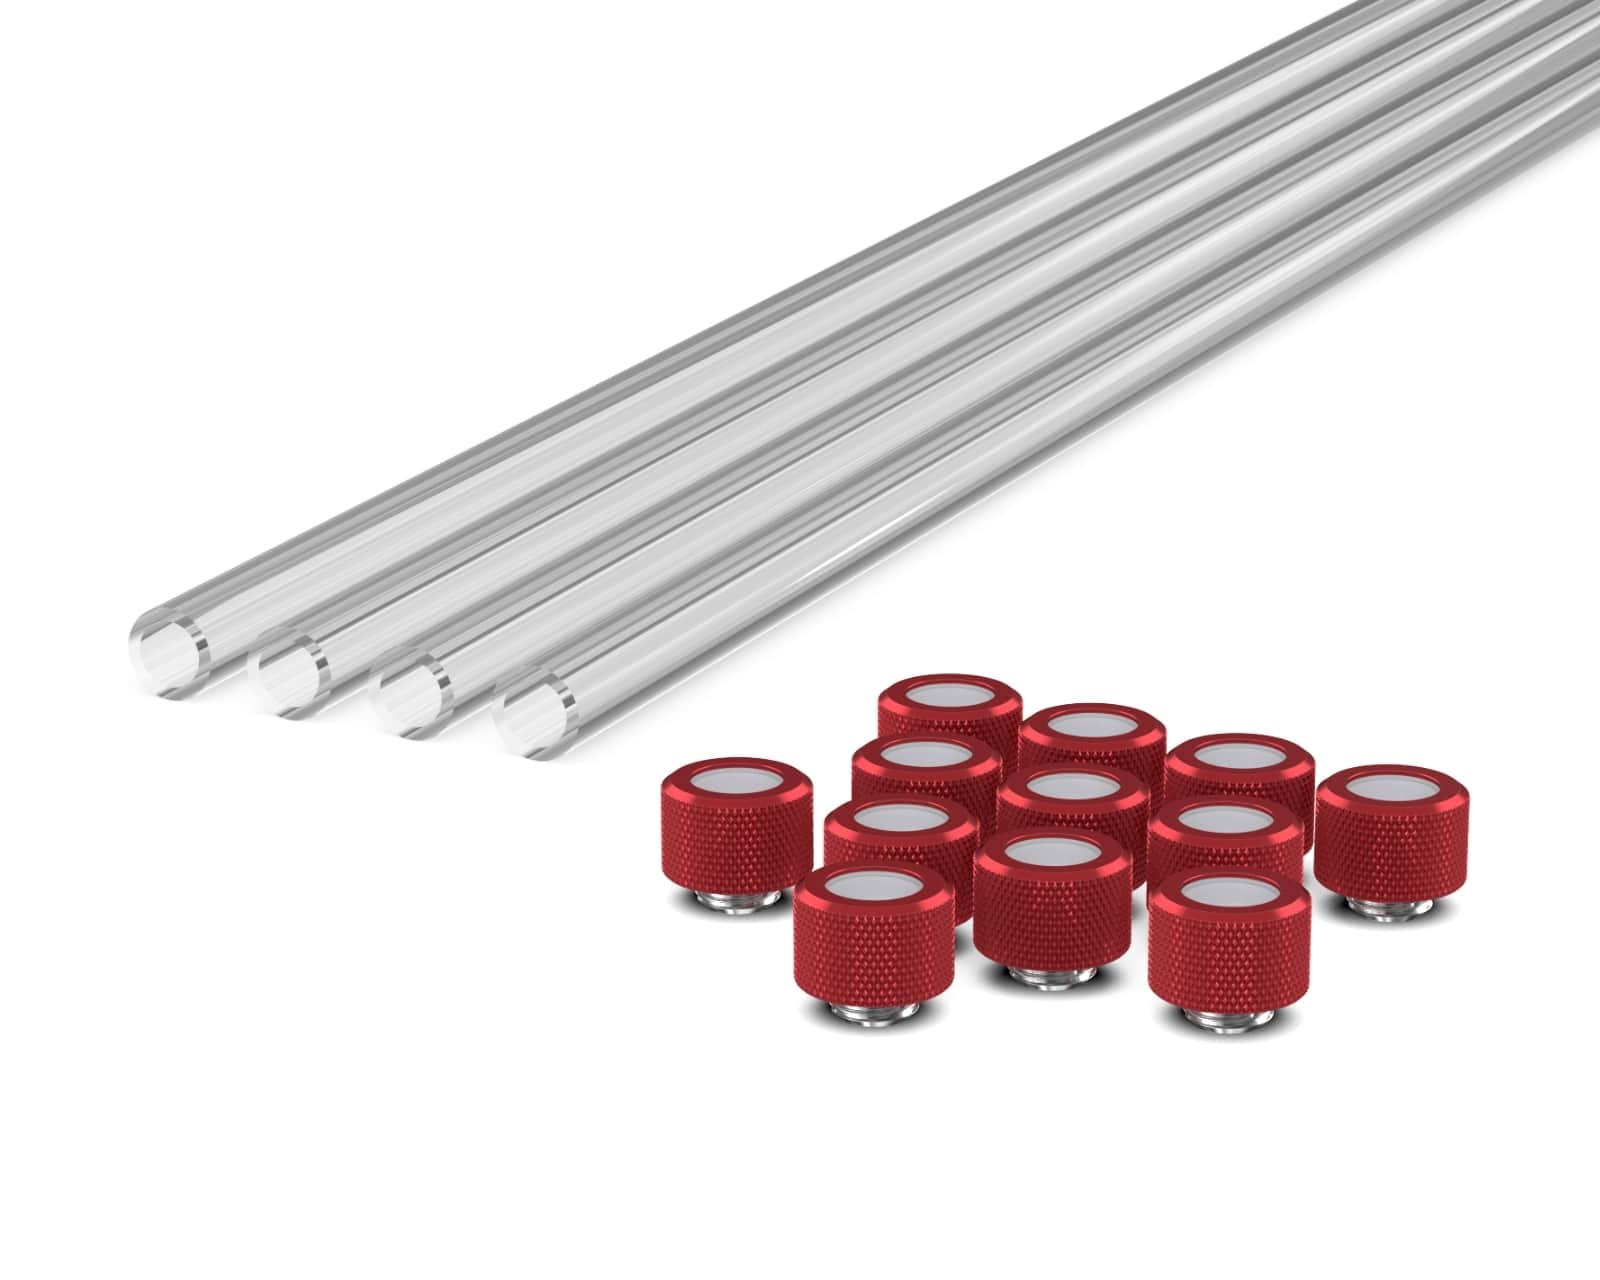 PrimoChill (Basic Kit) 4x 14mm Acrylic/PMMA Tubes, 12x Metric SX Fittings - Candy Red